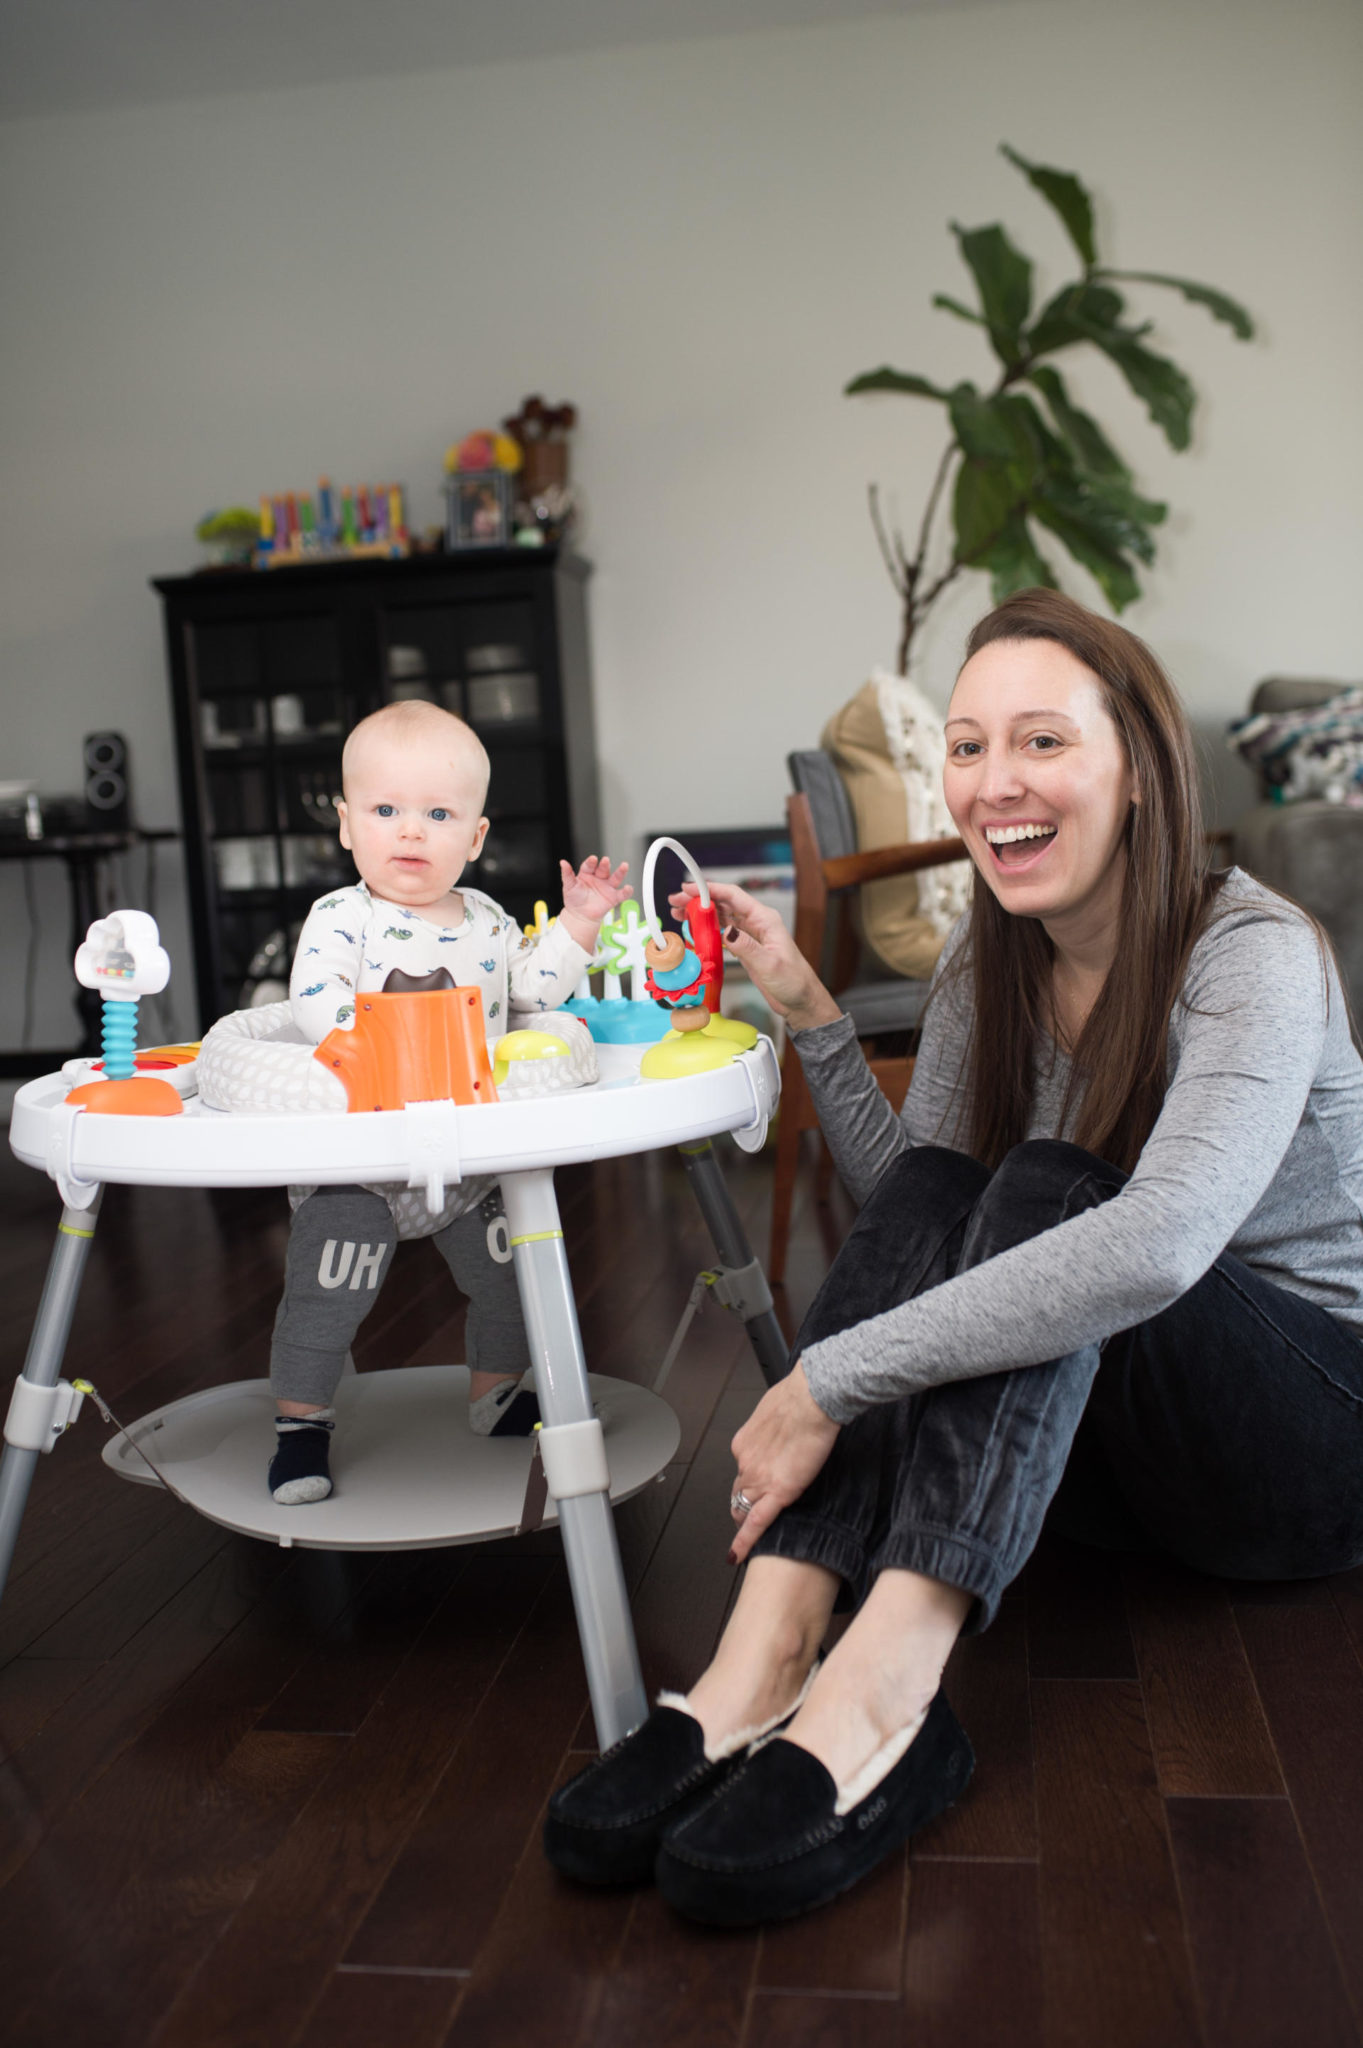 BABY: Sunday Mornings with Skip Hop Activity Center by popular New Jersey lifestyle blogger What's For Dinner Esq.